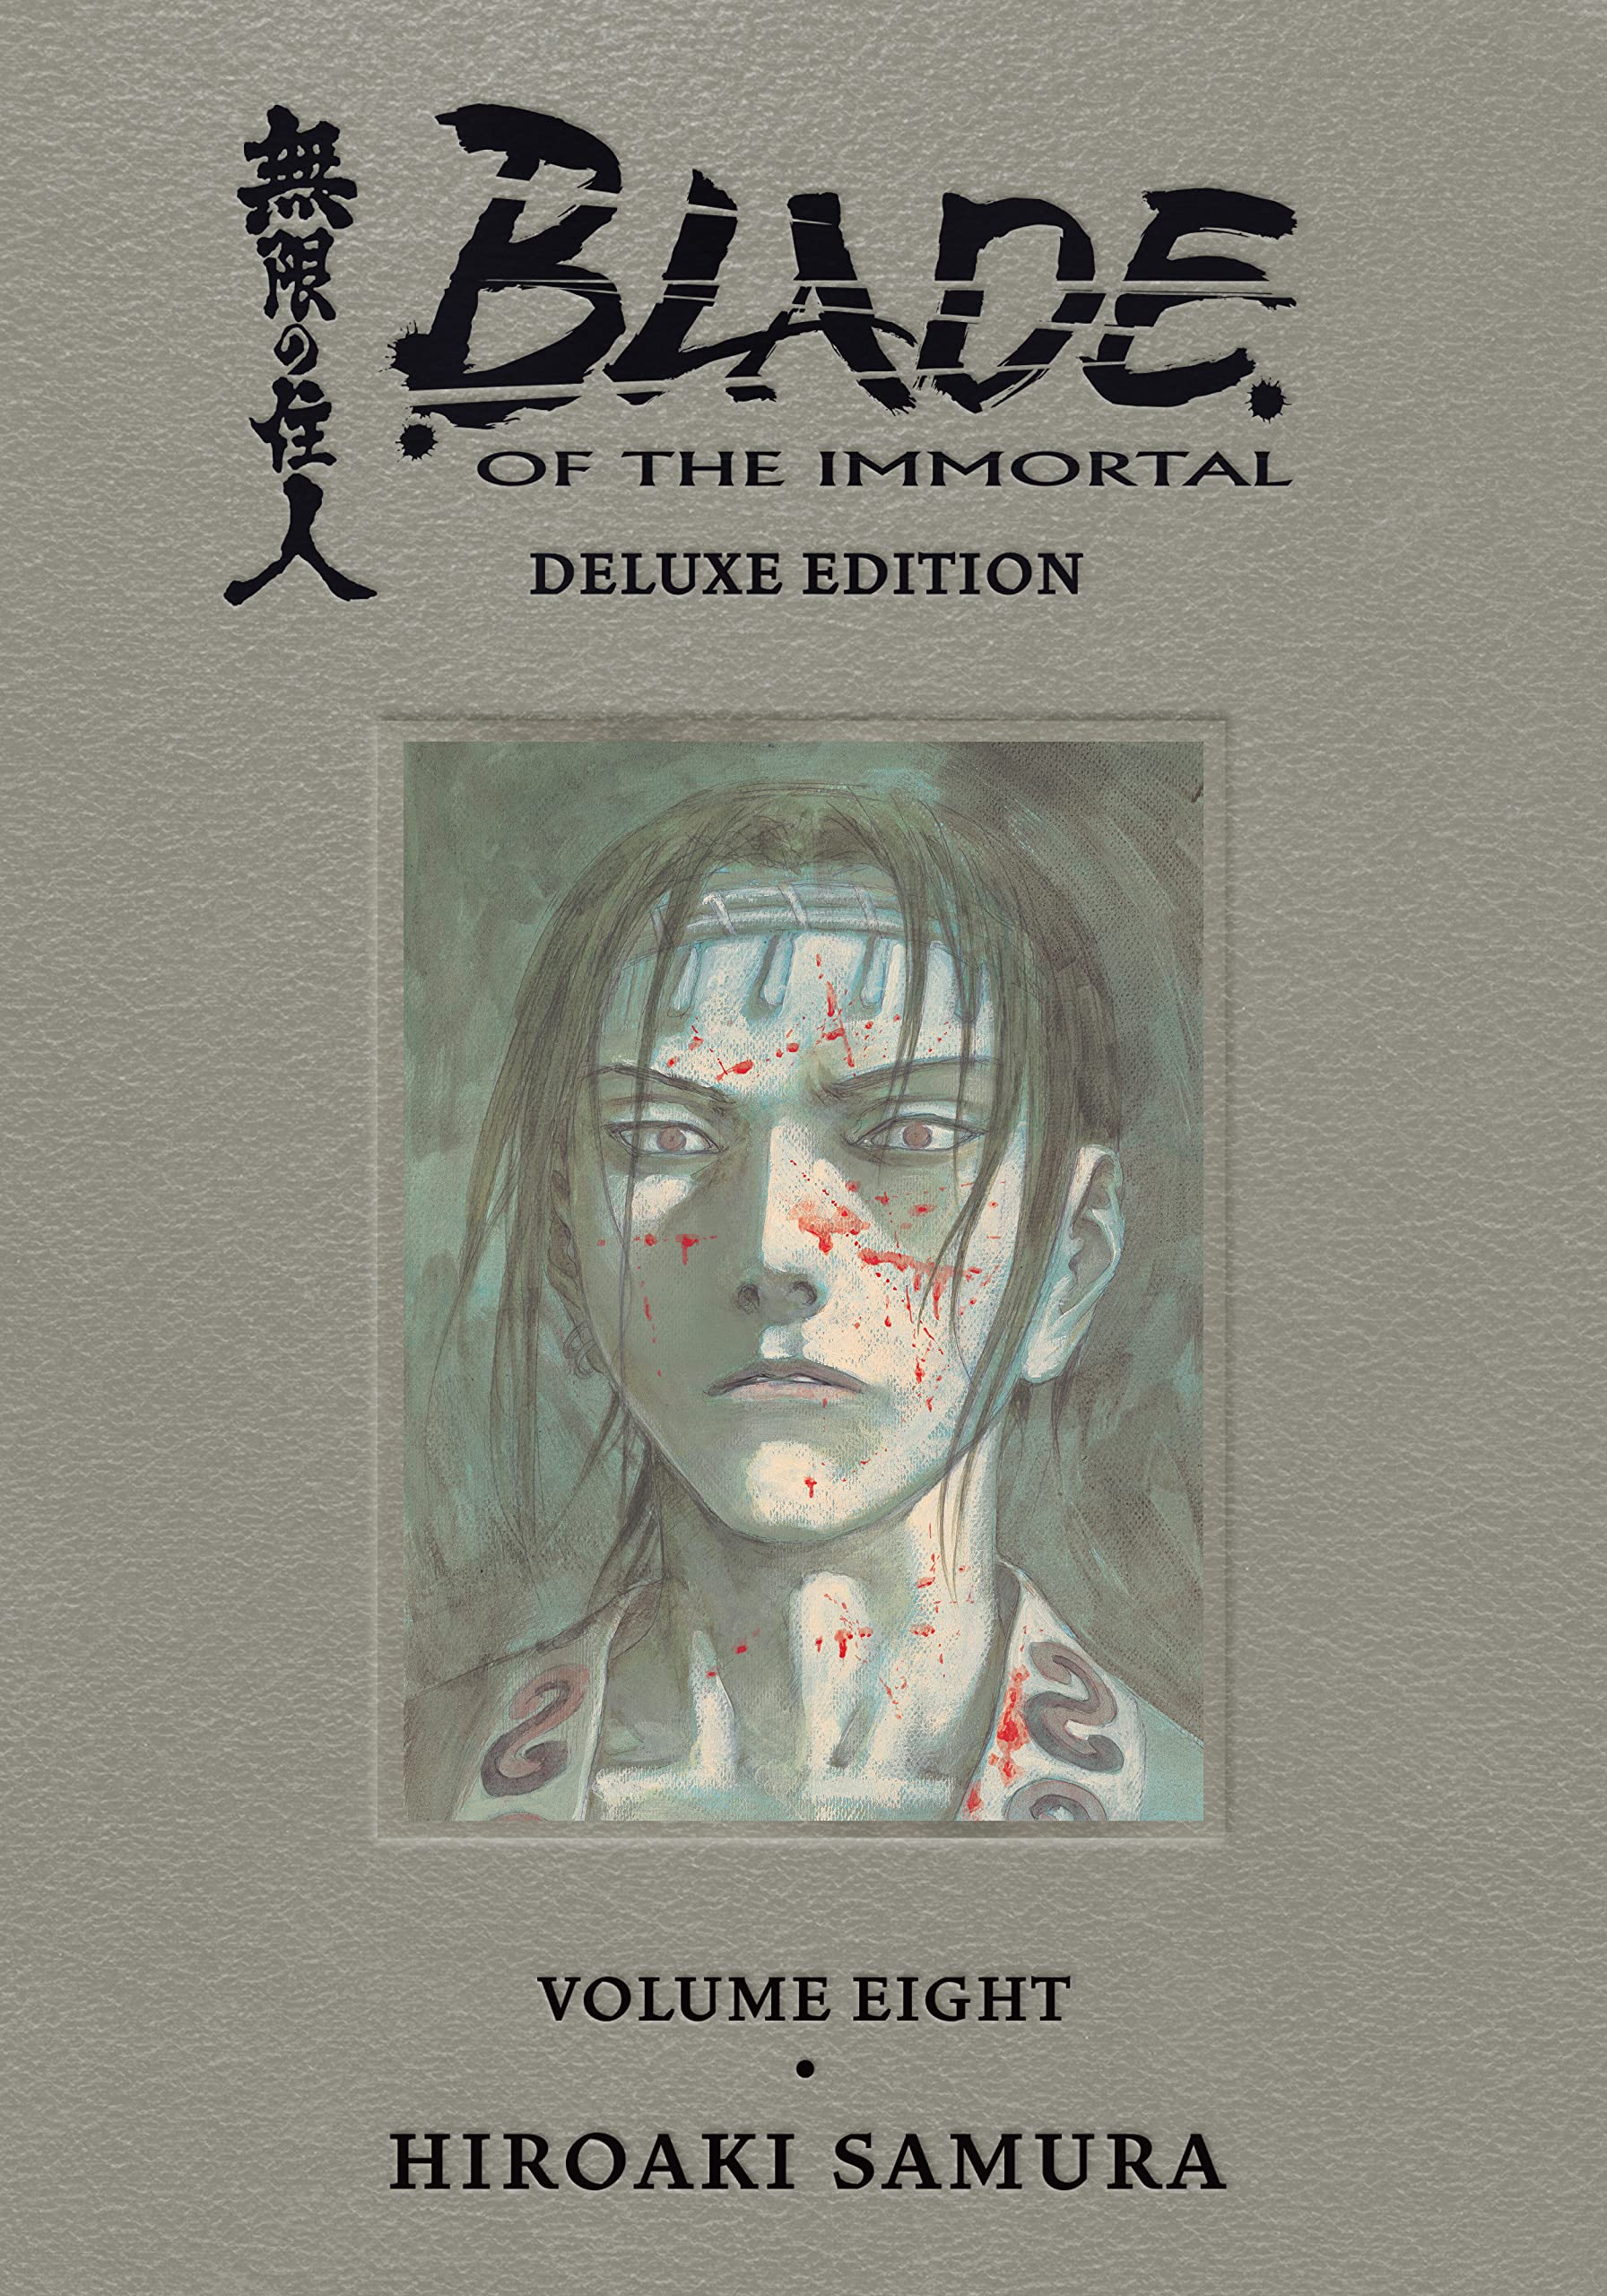 Blade of the Immortal Deluxe Edition Vol. 08